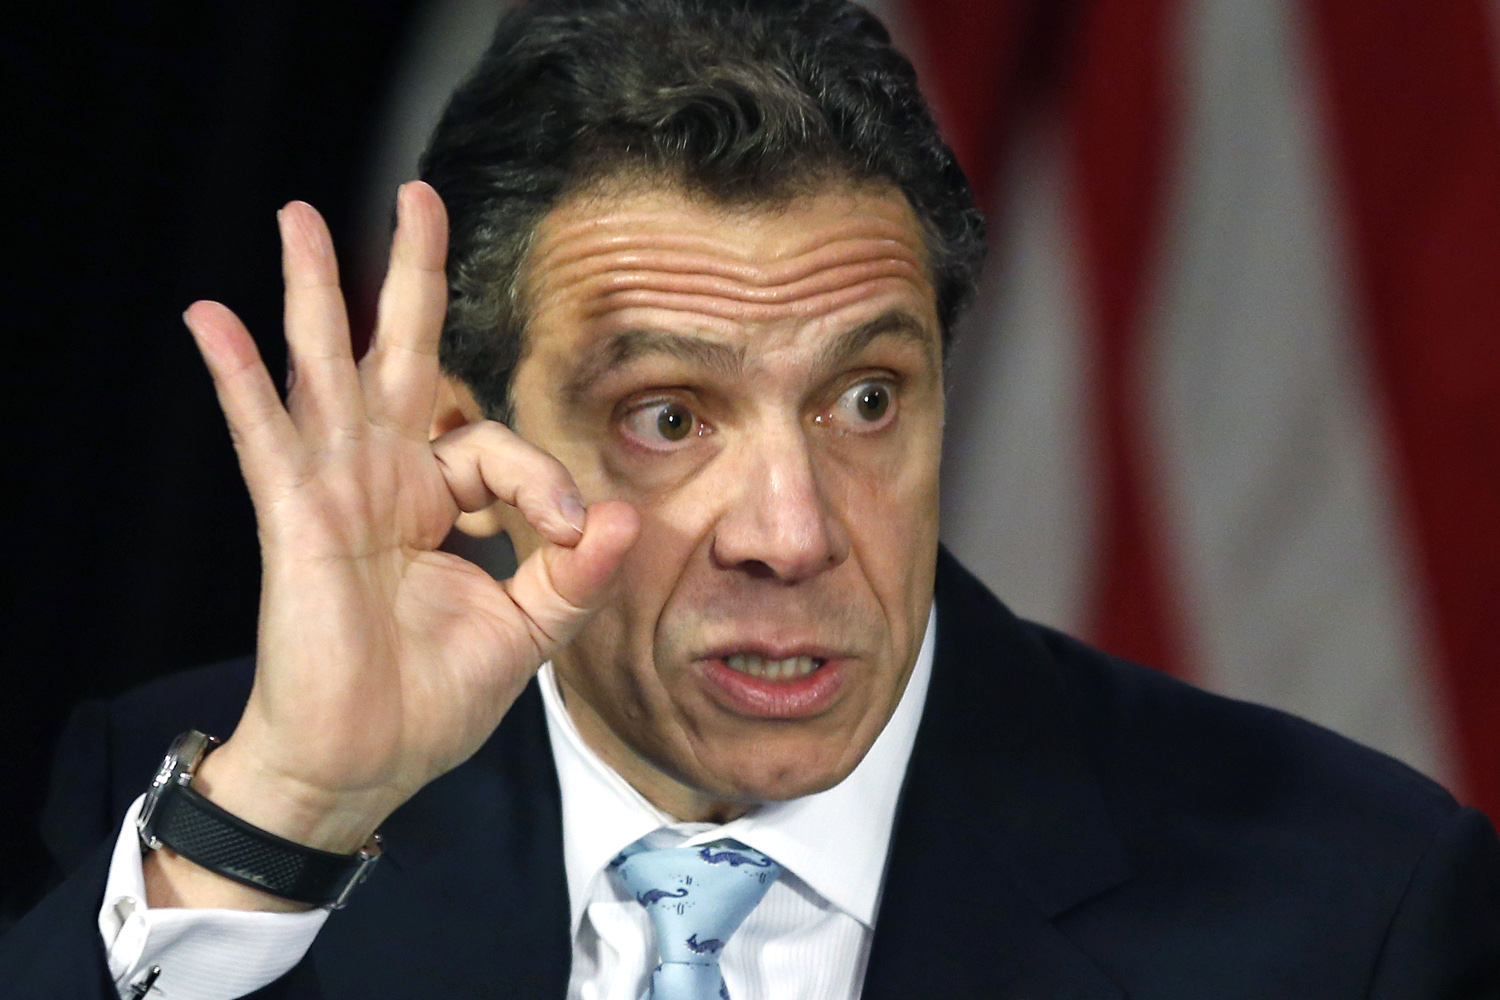 New York DFS Bill Passes as Governor Andrew Cuomo Signs it into Law